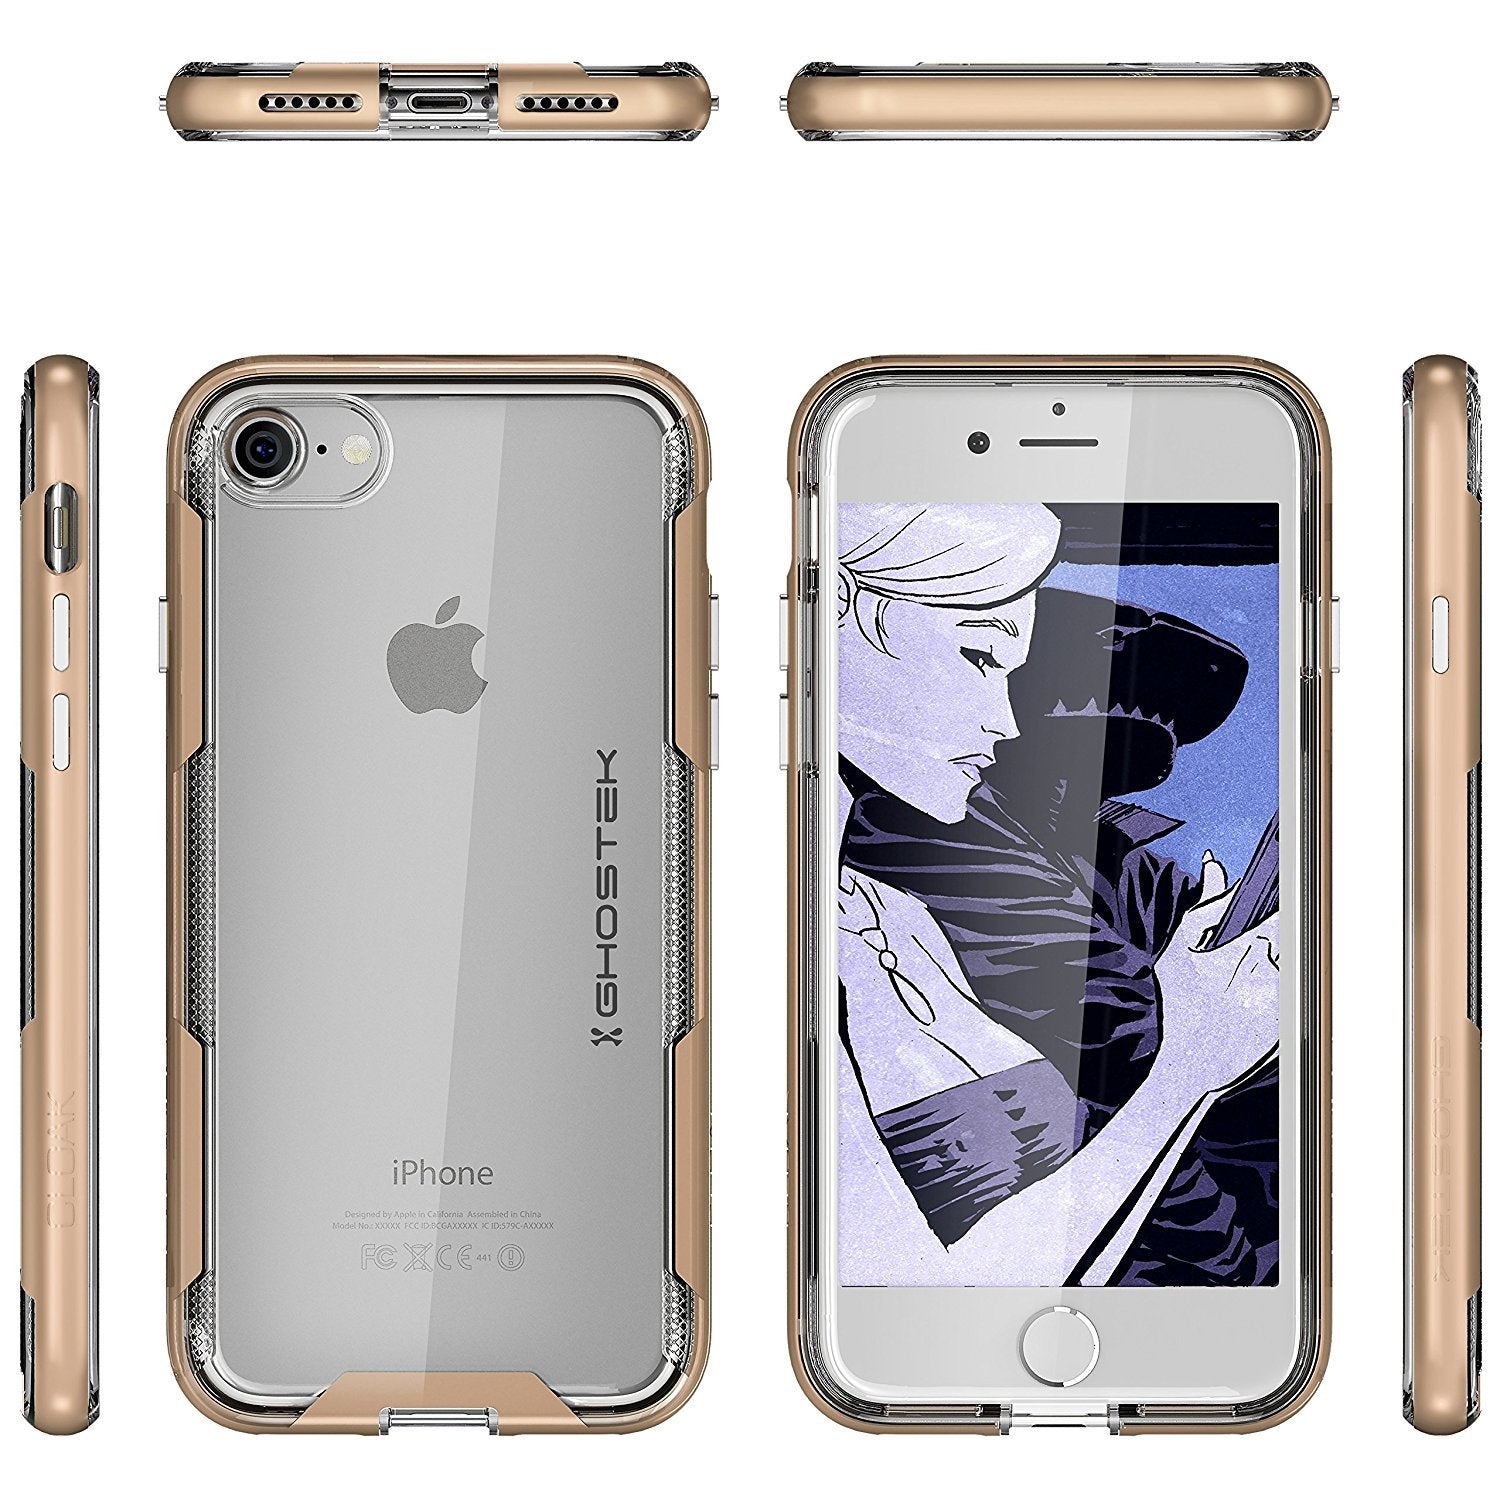 iPhone 7 Case, Ghostek Cloak 3 Series Case for iPhone 7 Case Clear Protective Case [GOLD] - PunkCase NZ